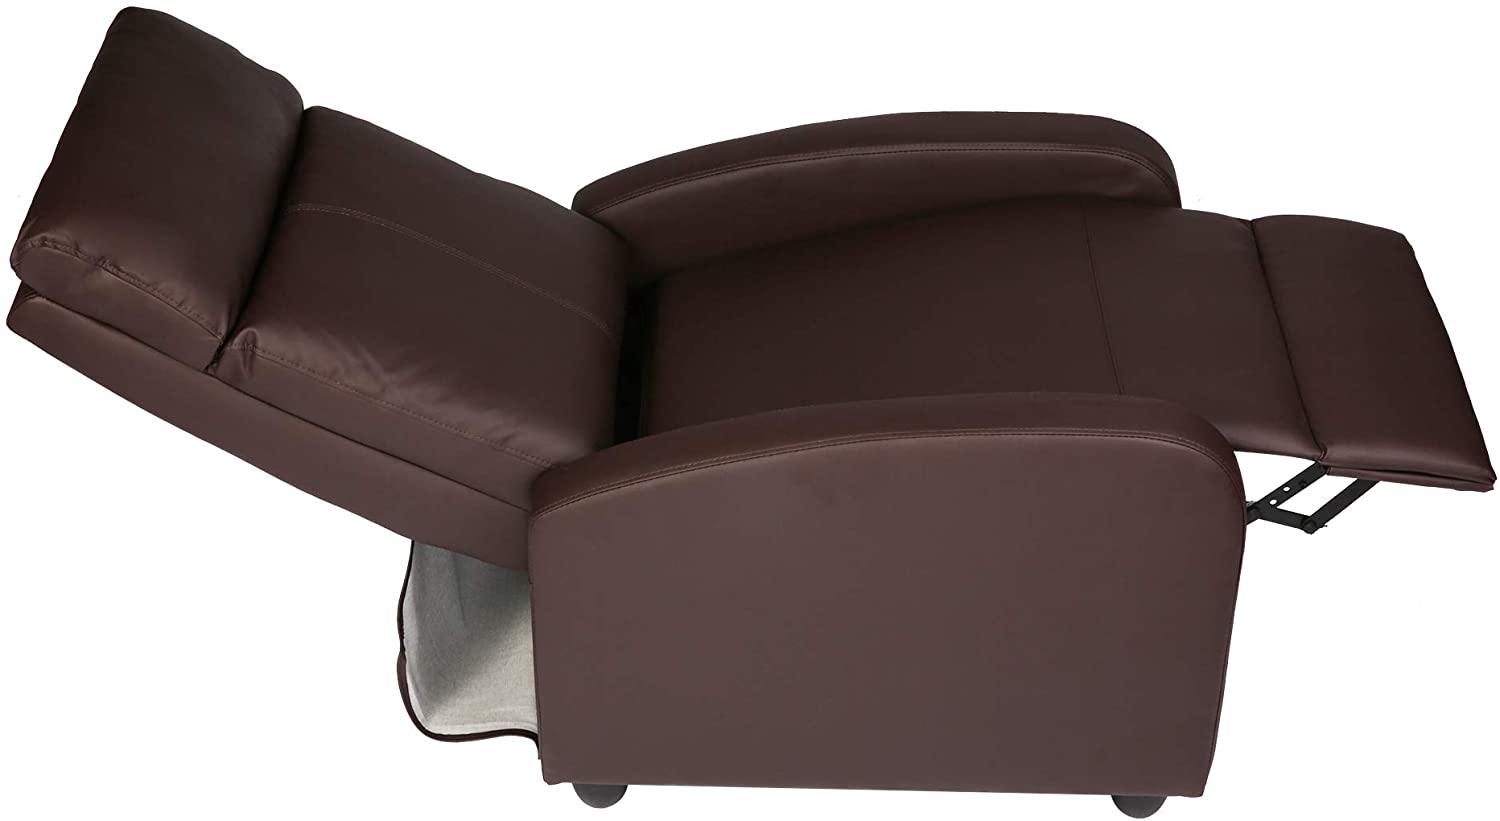 Recliner Chair PU Leather Single Sofa Adjustable Home Theater Seating Recliner Sofa for Living Room & Bedroom, Brown - Bosonshop